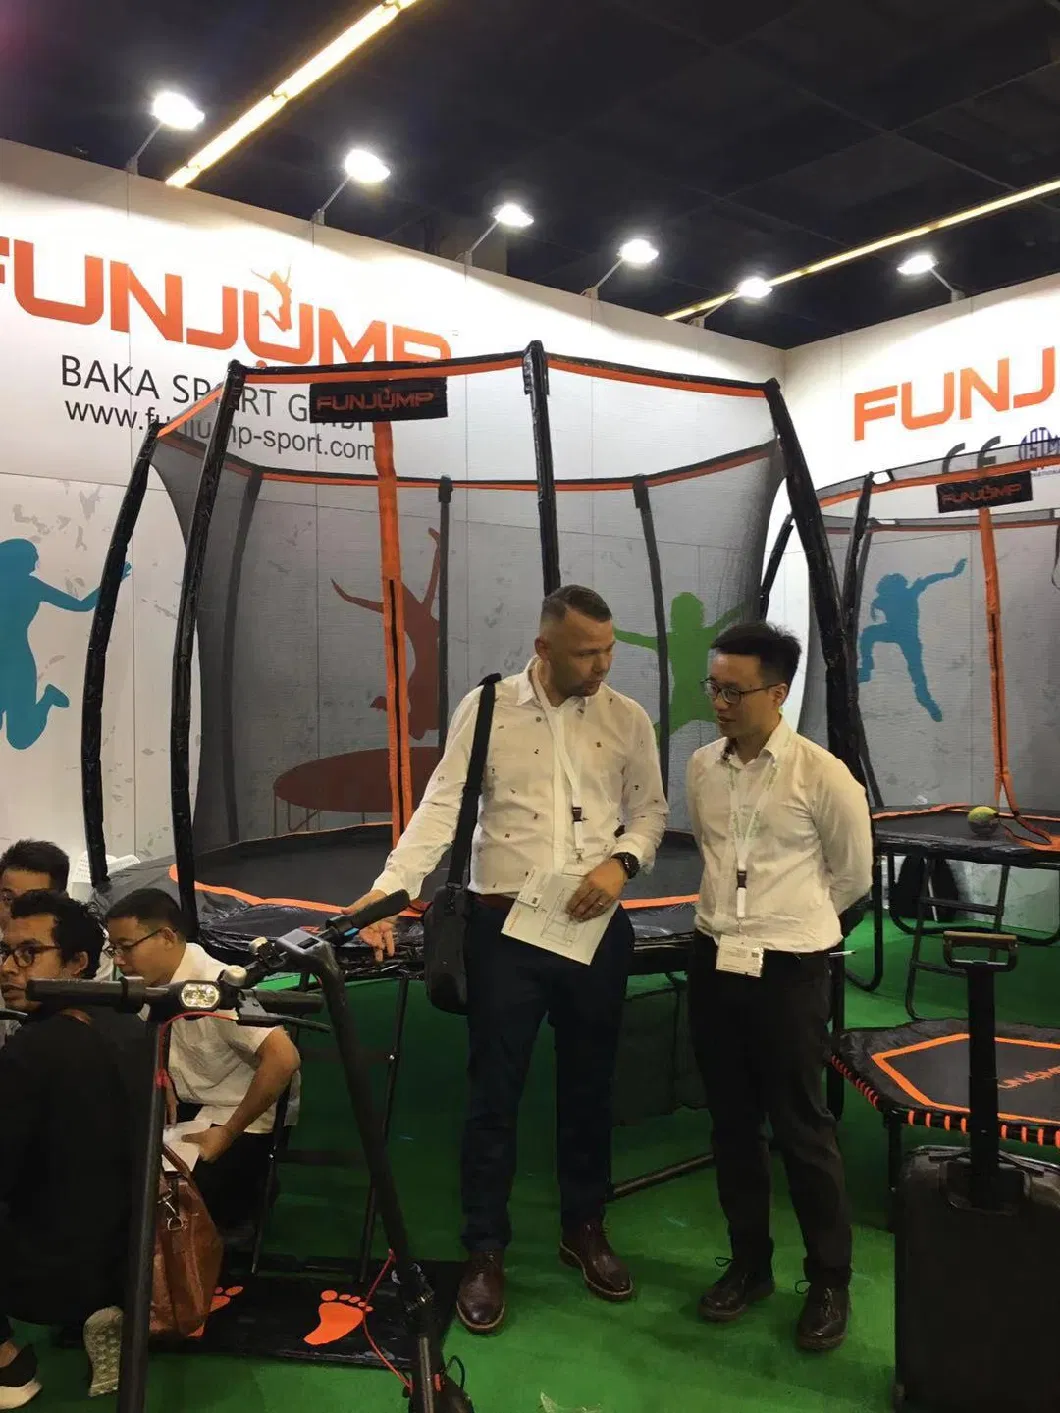 Funjump Fitness Multicolor Trampoline 8FT 10FT Outdoor Garden Trampoline with Safety Enclosure Net